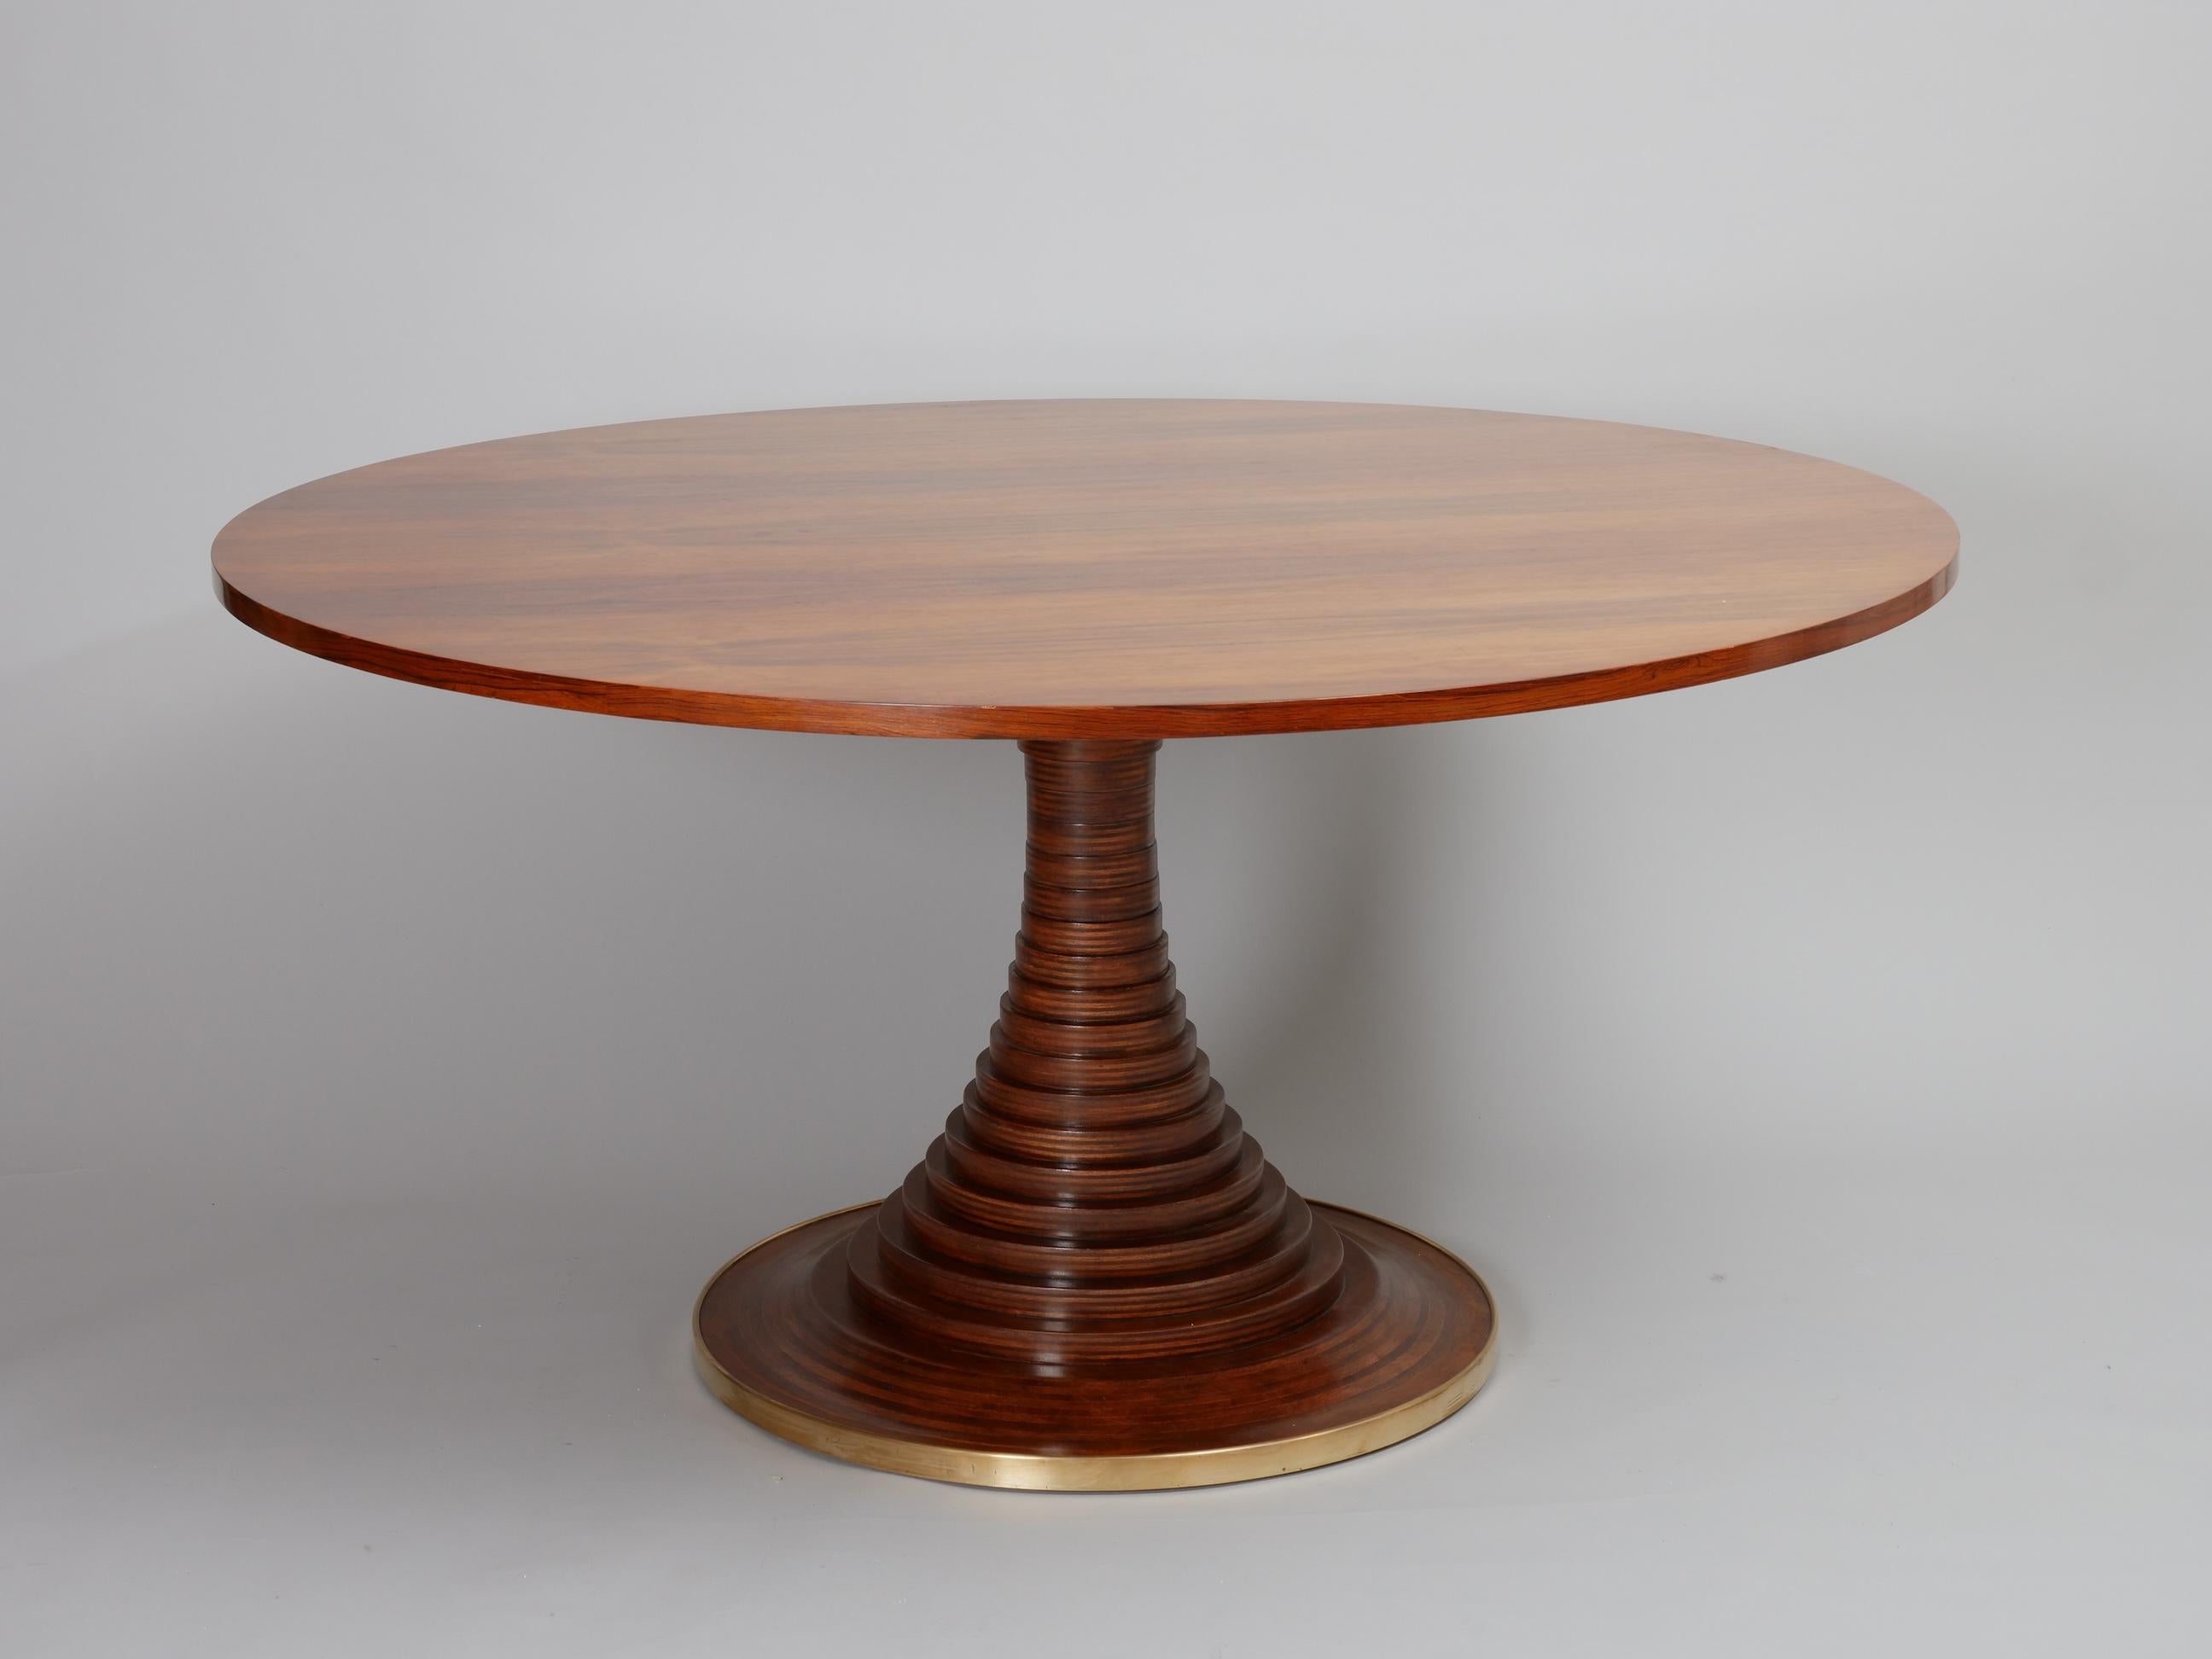 Beautiful centre or dining table designed by Carlo de Carli c1964 and produced by Sormani

The wood has been sympathetically restored and has a lovely warm patina. The brass band has been polished. 

Model 180



